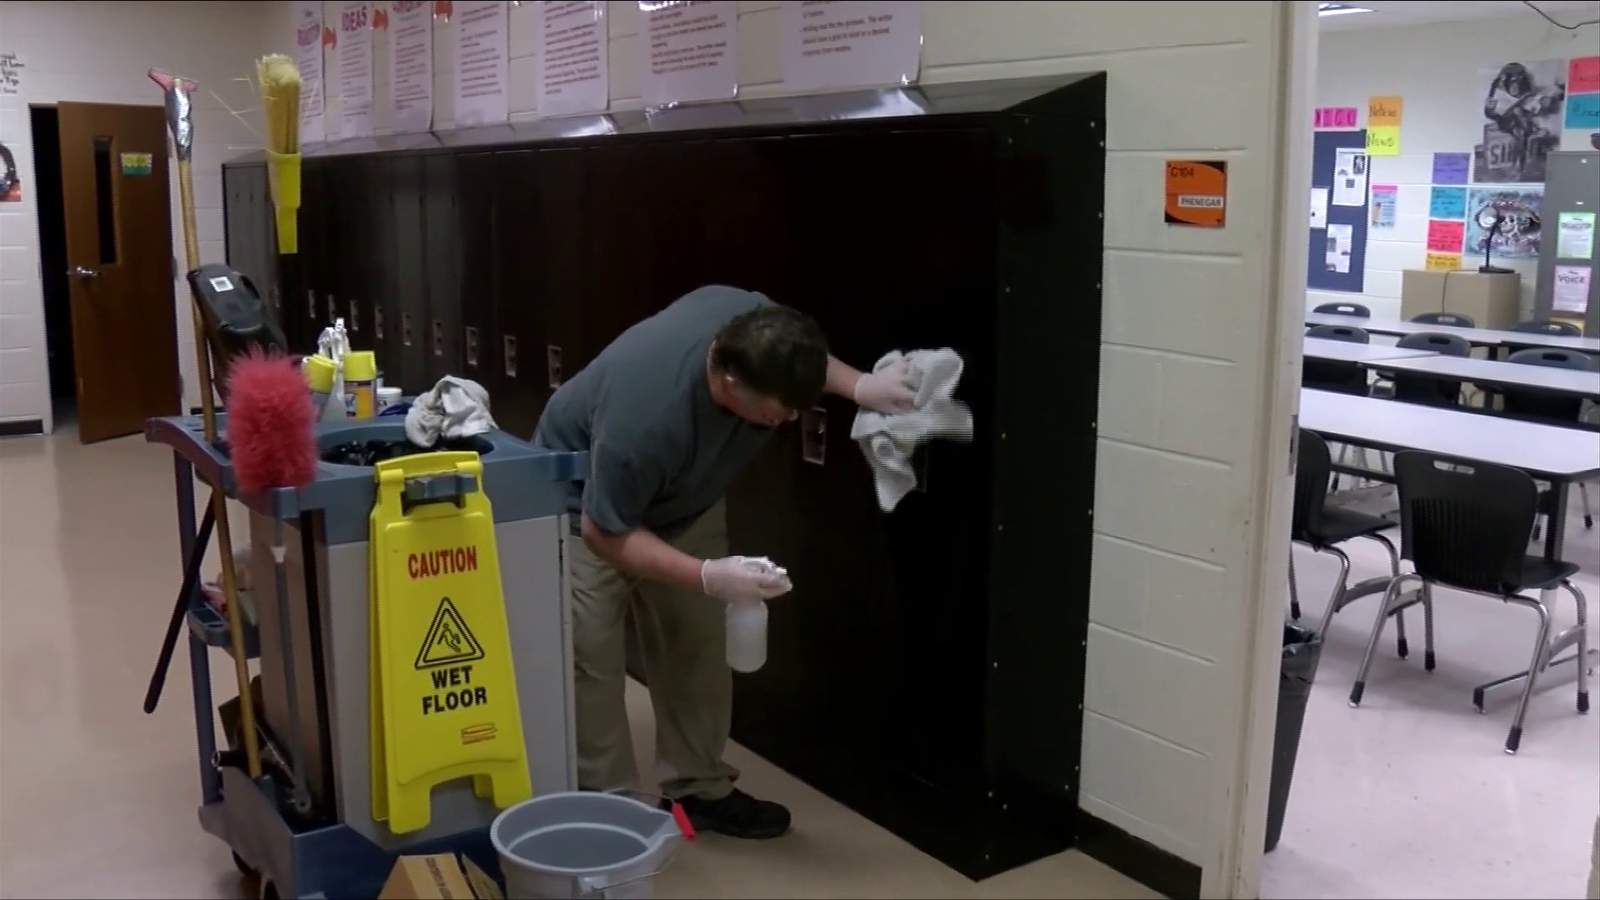 Custodial staff disinfects while Bath County schools are closed due to sickness